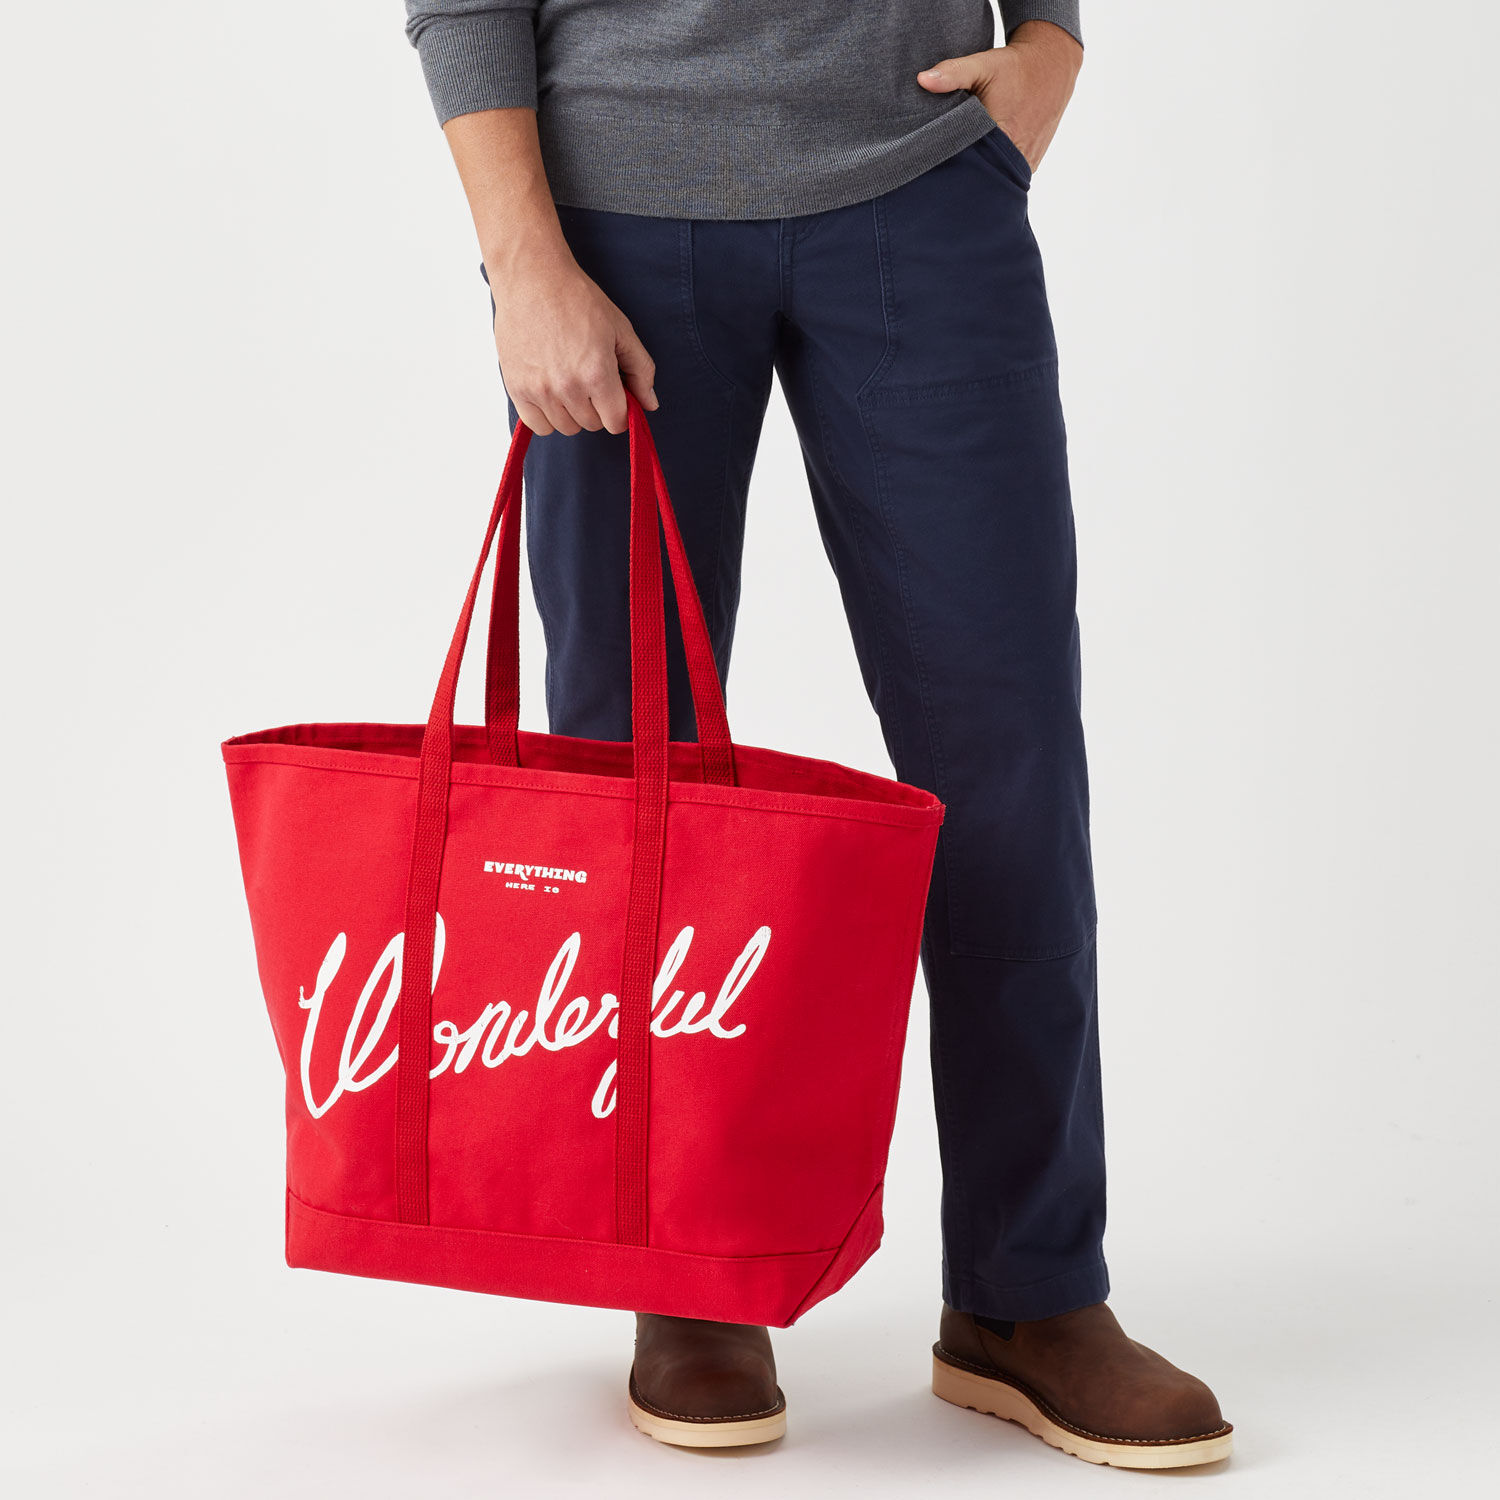 Best Made Wonderful Tote | Duluth Trading Company